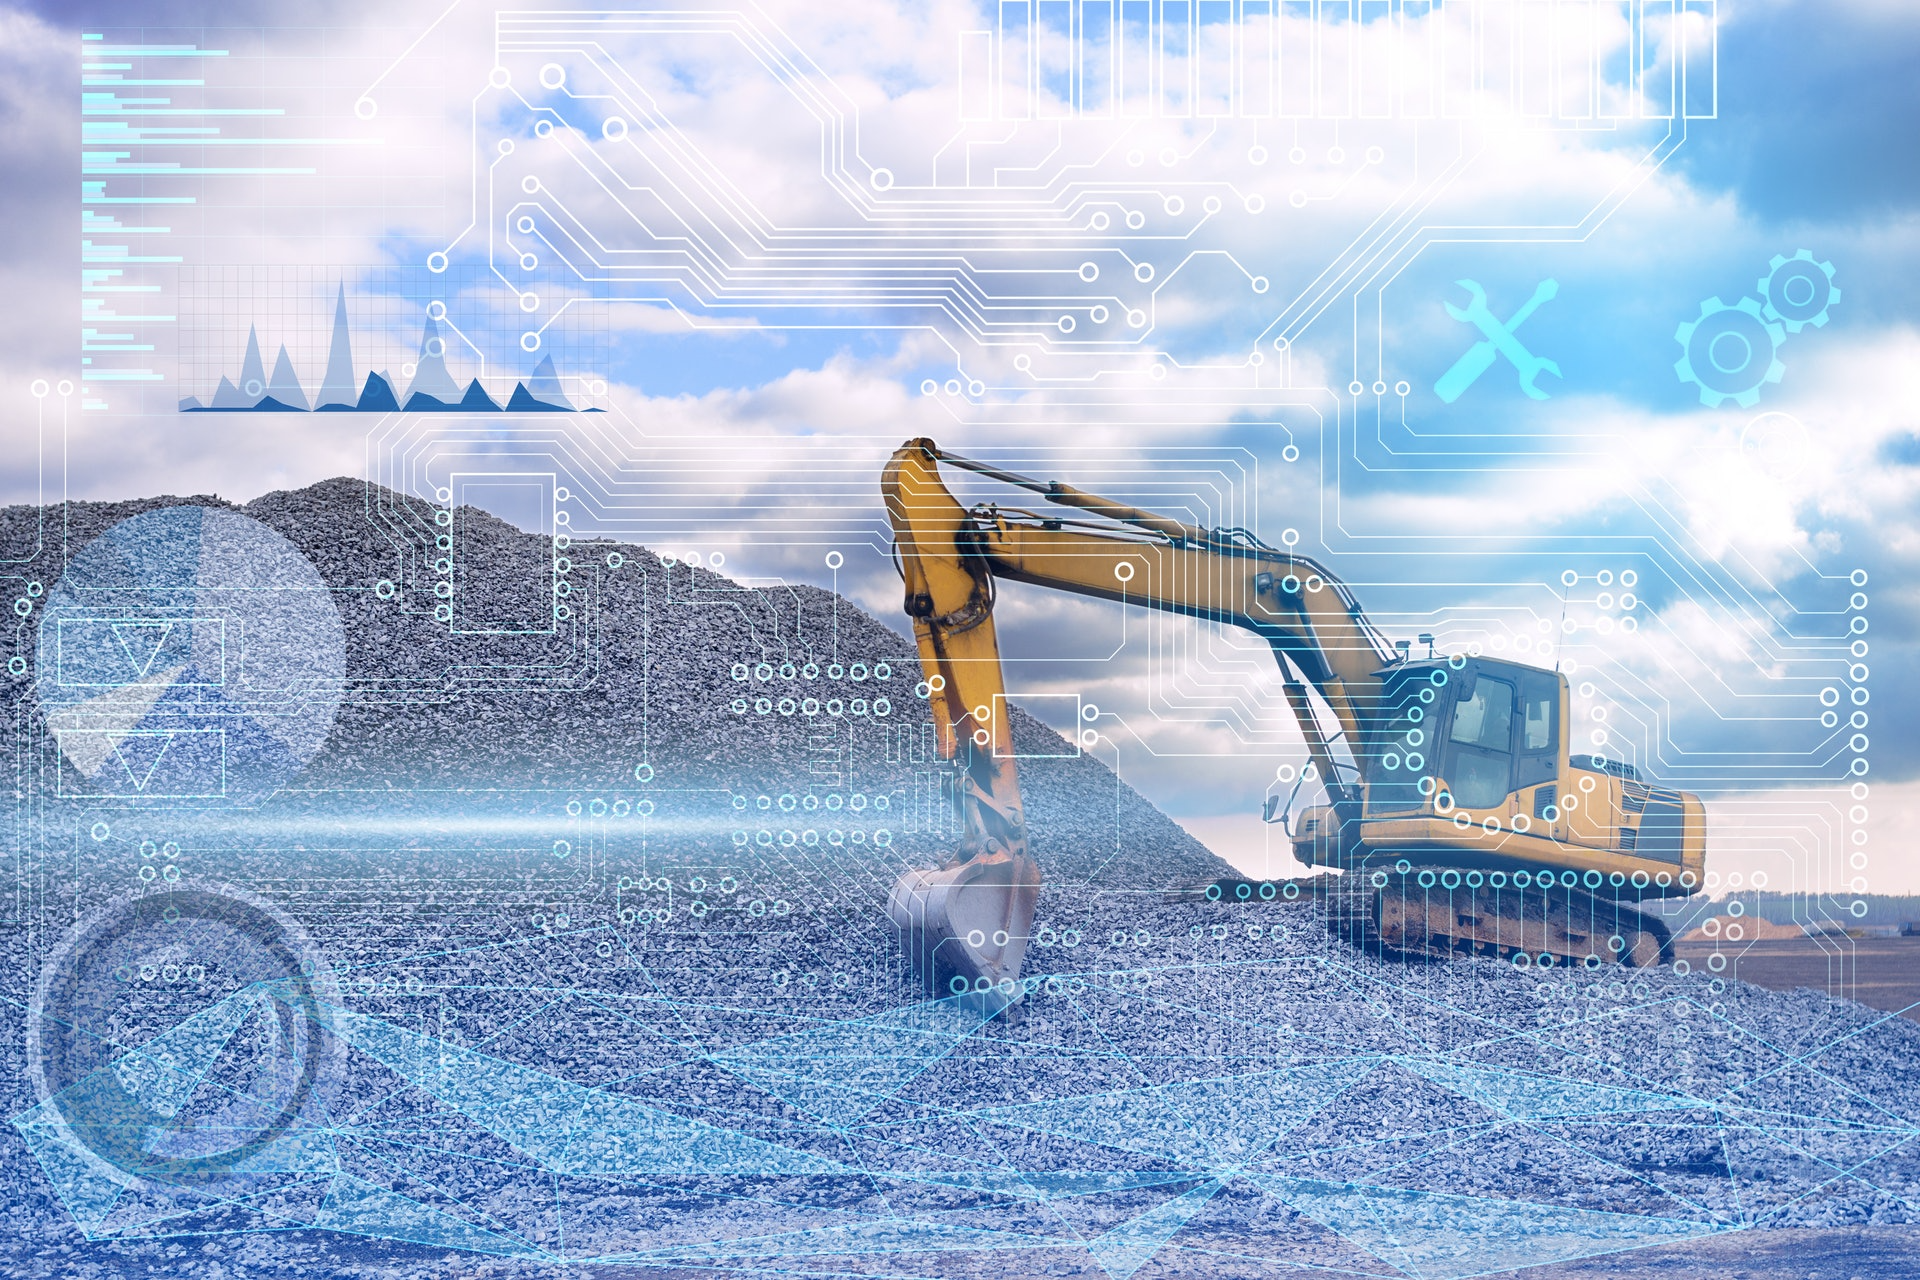 “Digitalization of Construction Machines: More Efficient and Sustainable Operations with IoT Technology”